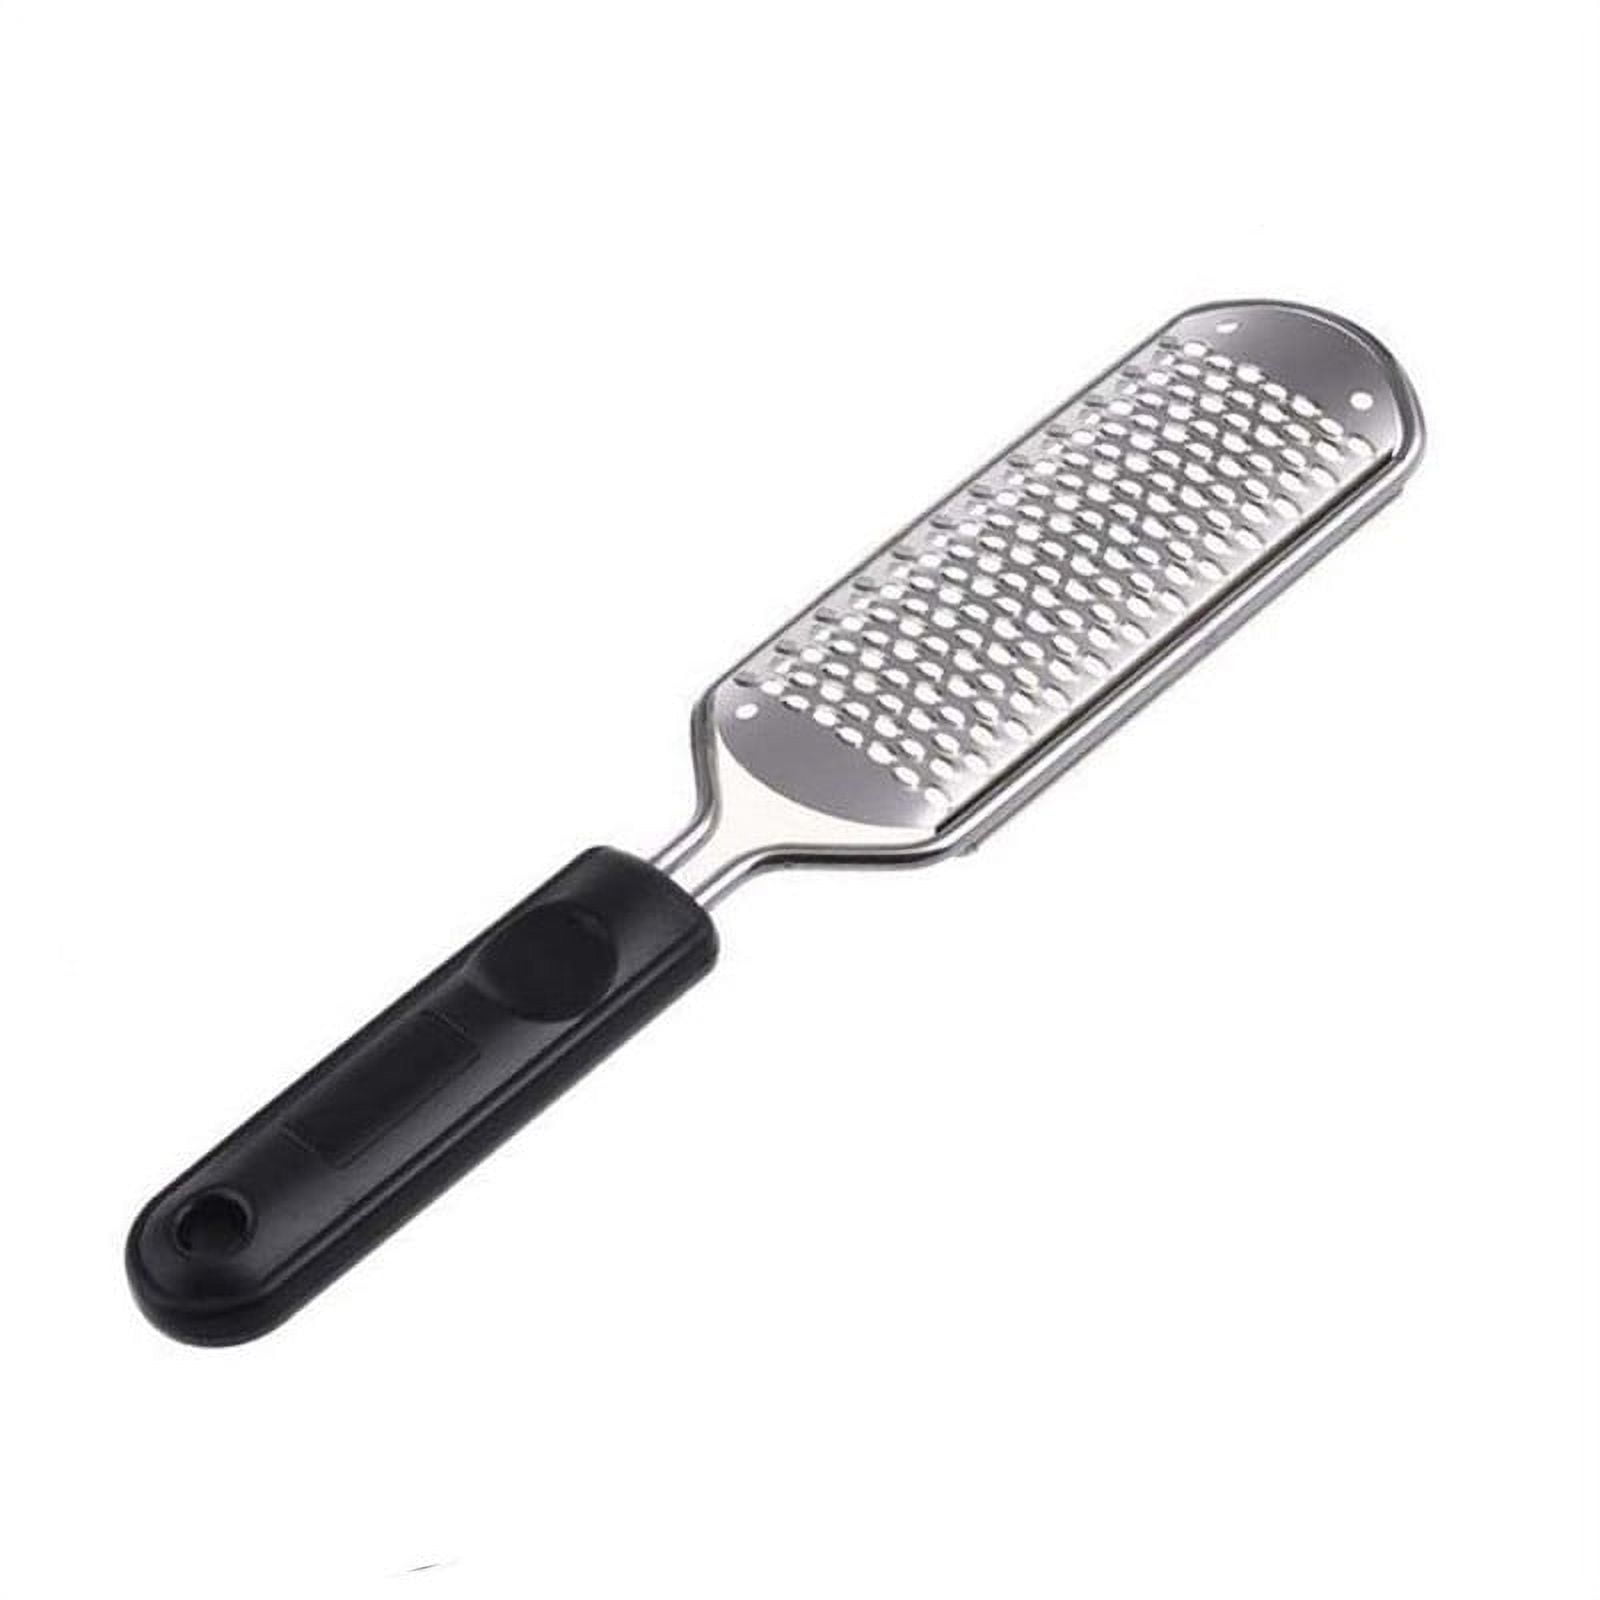 Foot Scrubber Files for Callus Remover - 34 Rows 442 Micro Blades Capularsh  Professional Stainless Steel Foot File for Pedicure to Removes Hard Skin  Corns for Dry and Wet Feet Black